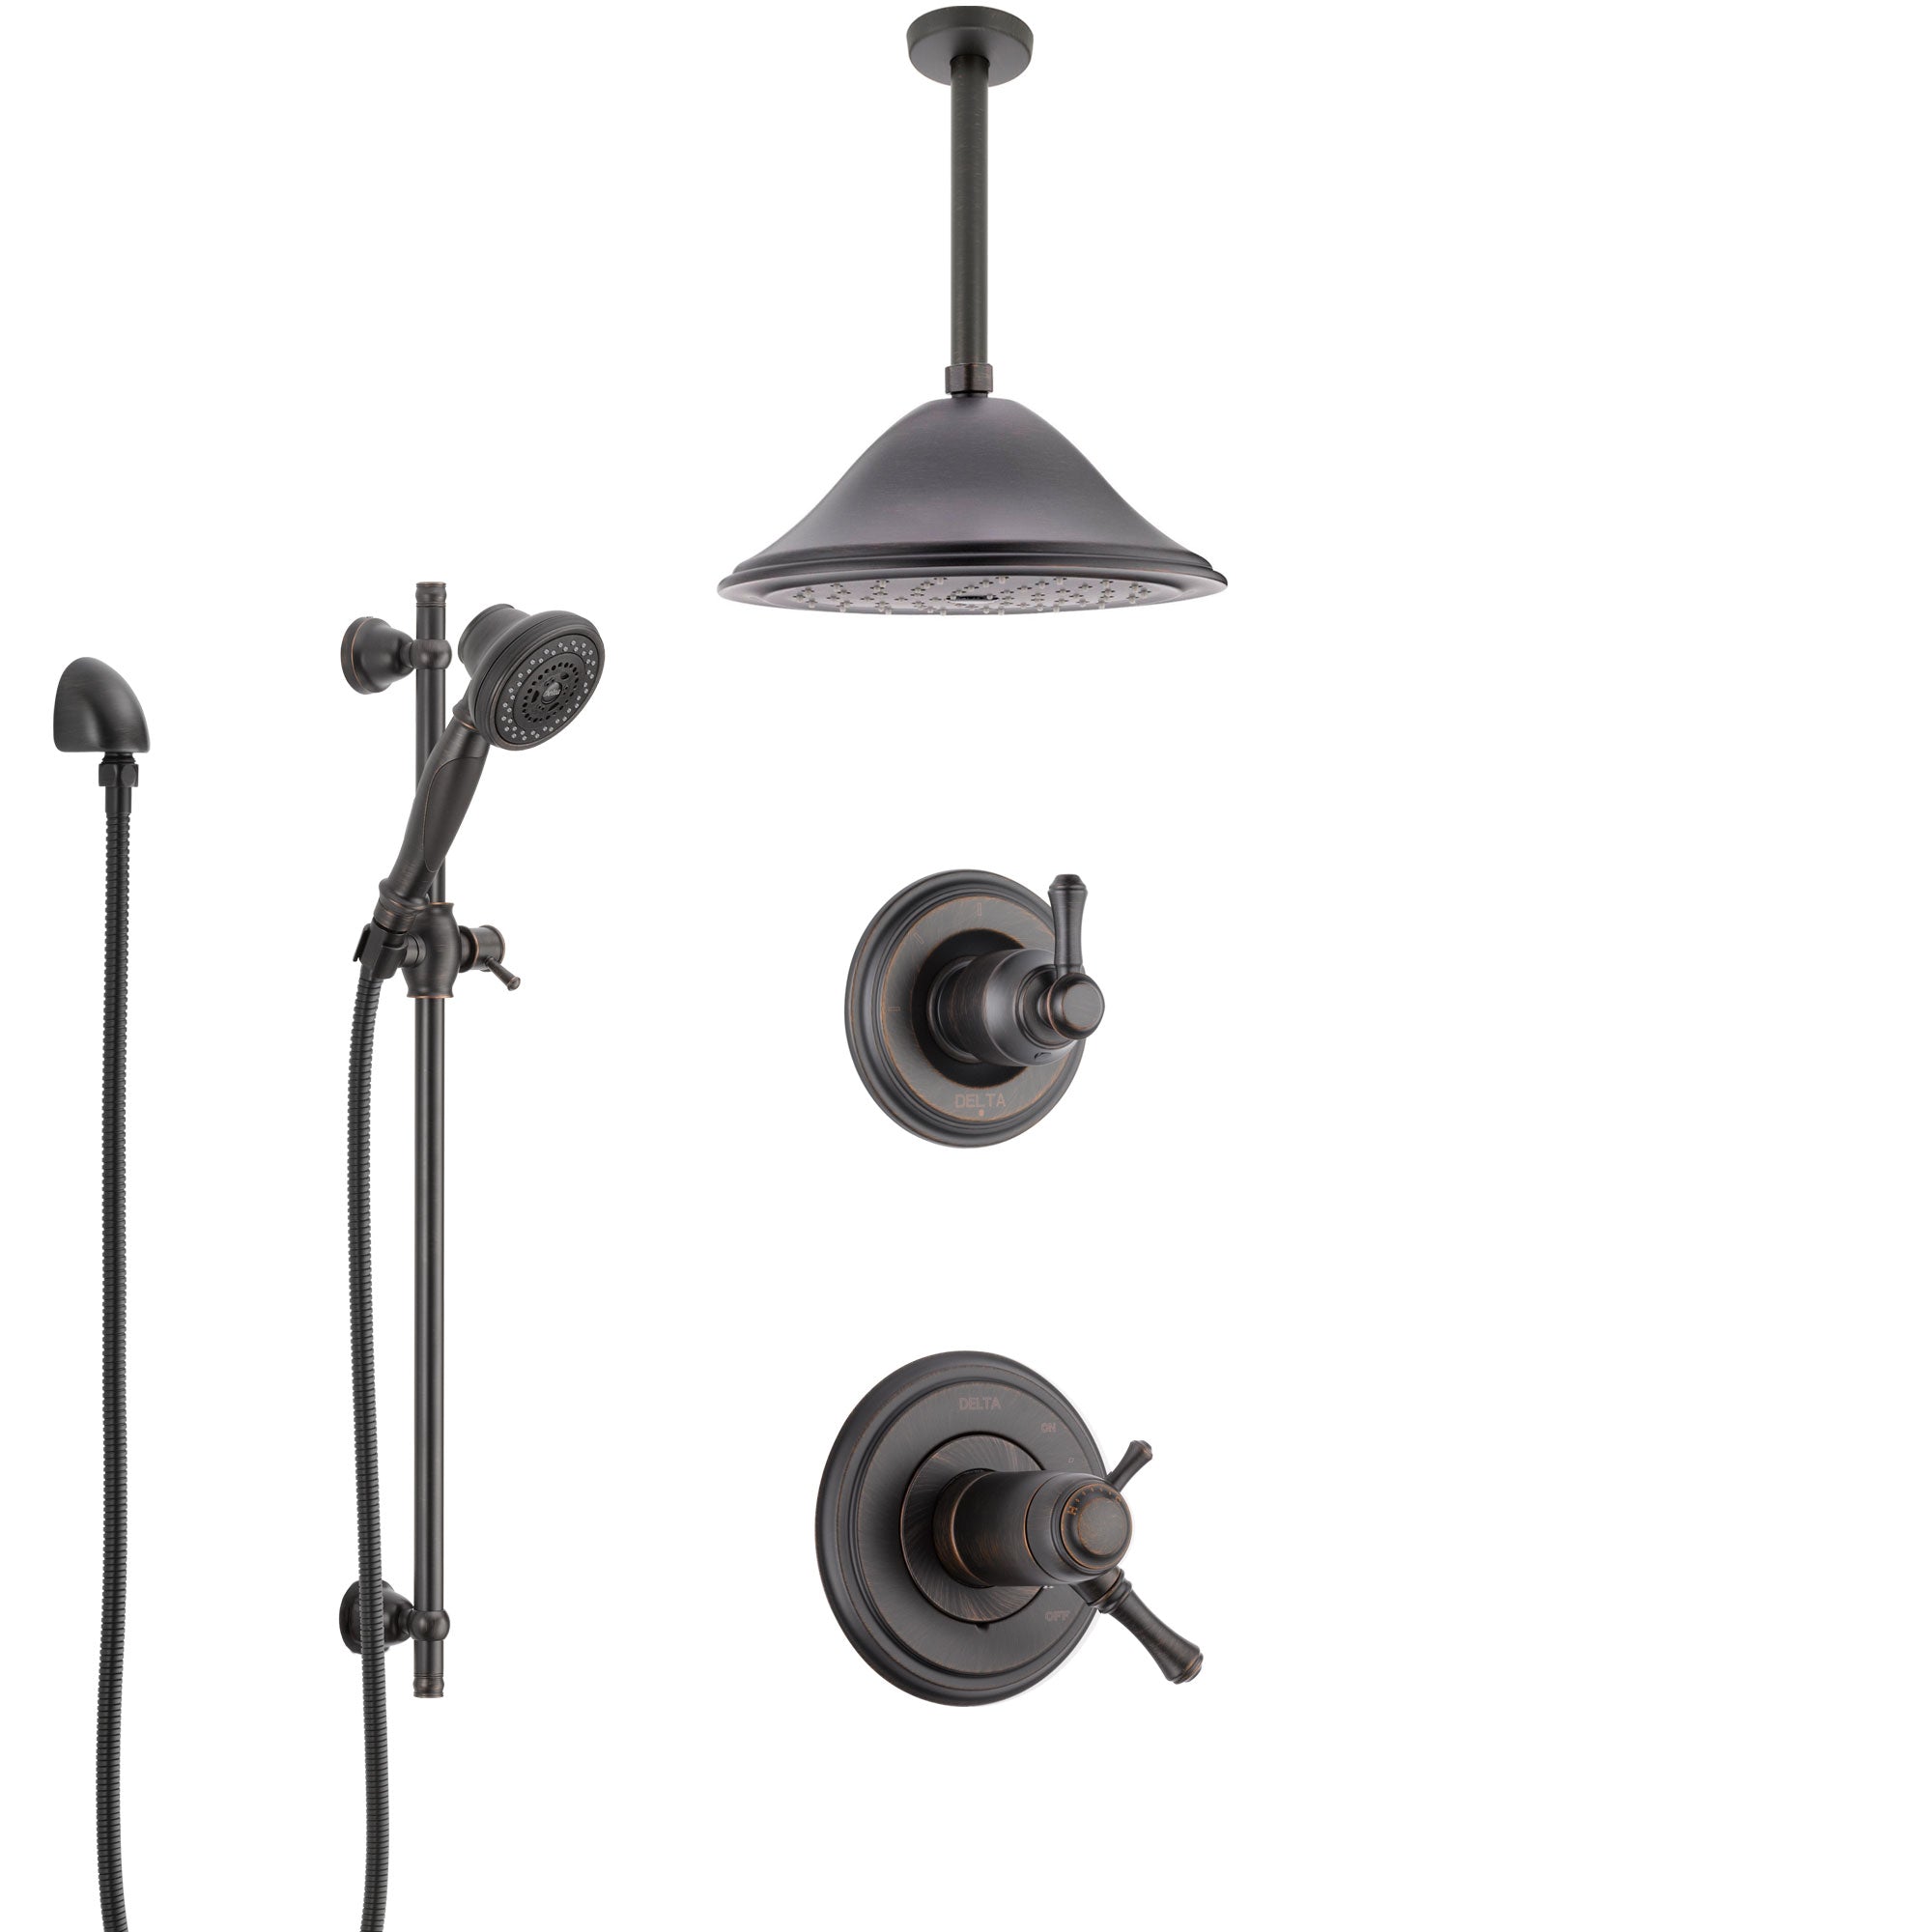 Delta Cassidy Venetian Bronze Shower System with Dual Thermostatic Control Handle, Diverter, Ceiling Mount Showerhead, and Hand Shower SS17T972RB3